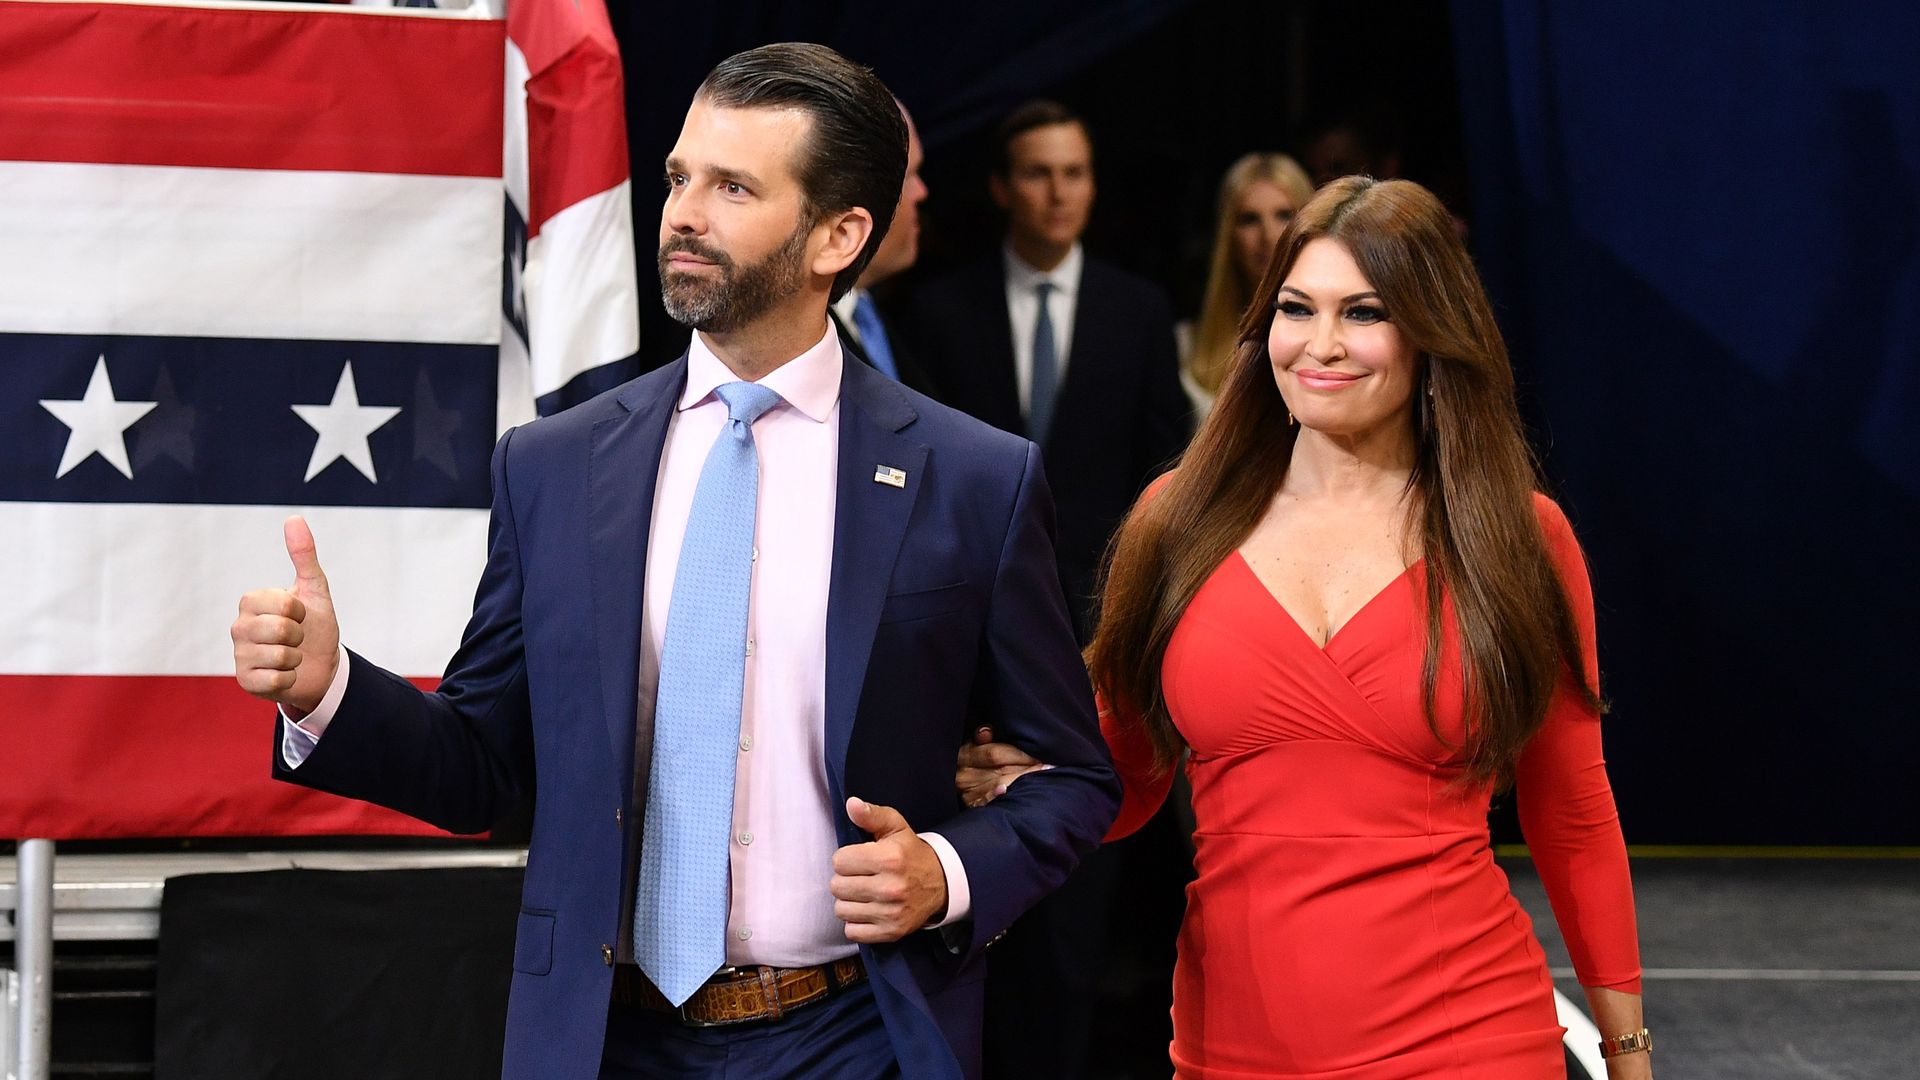 Kimberly Guilfoyle and Donald Trump Jr. arrive at a rally for President Trump